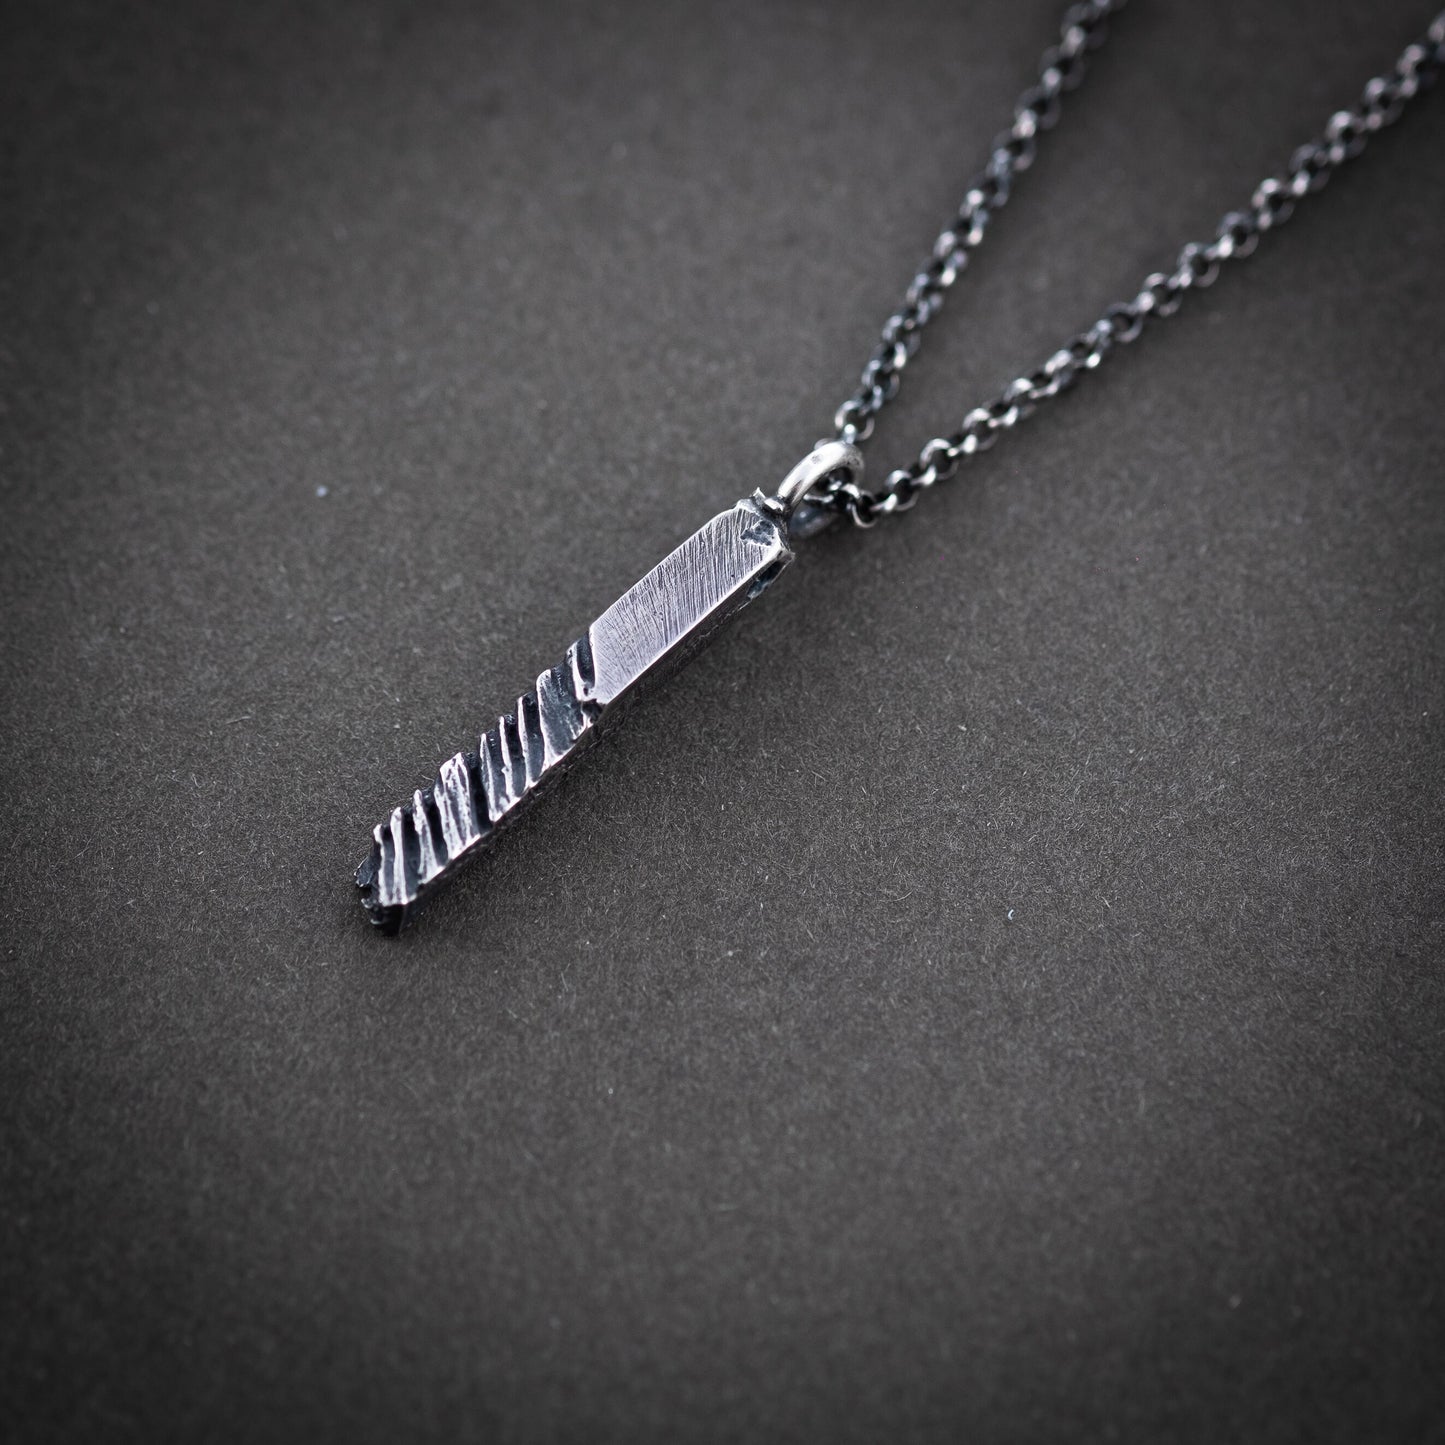 Unique Rustic Silver Bar mens Necklace, Handmade Gotchic Silver jewelry, boyfriend gift, Unique gifts,  Husband gift, Gift for him